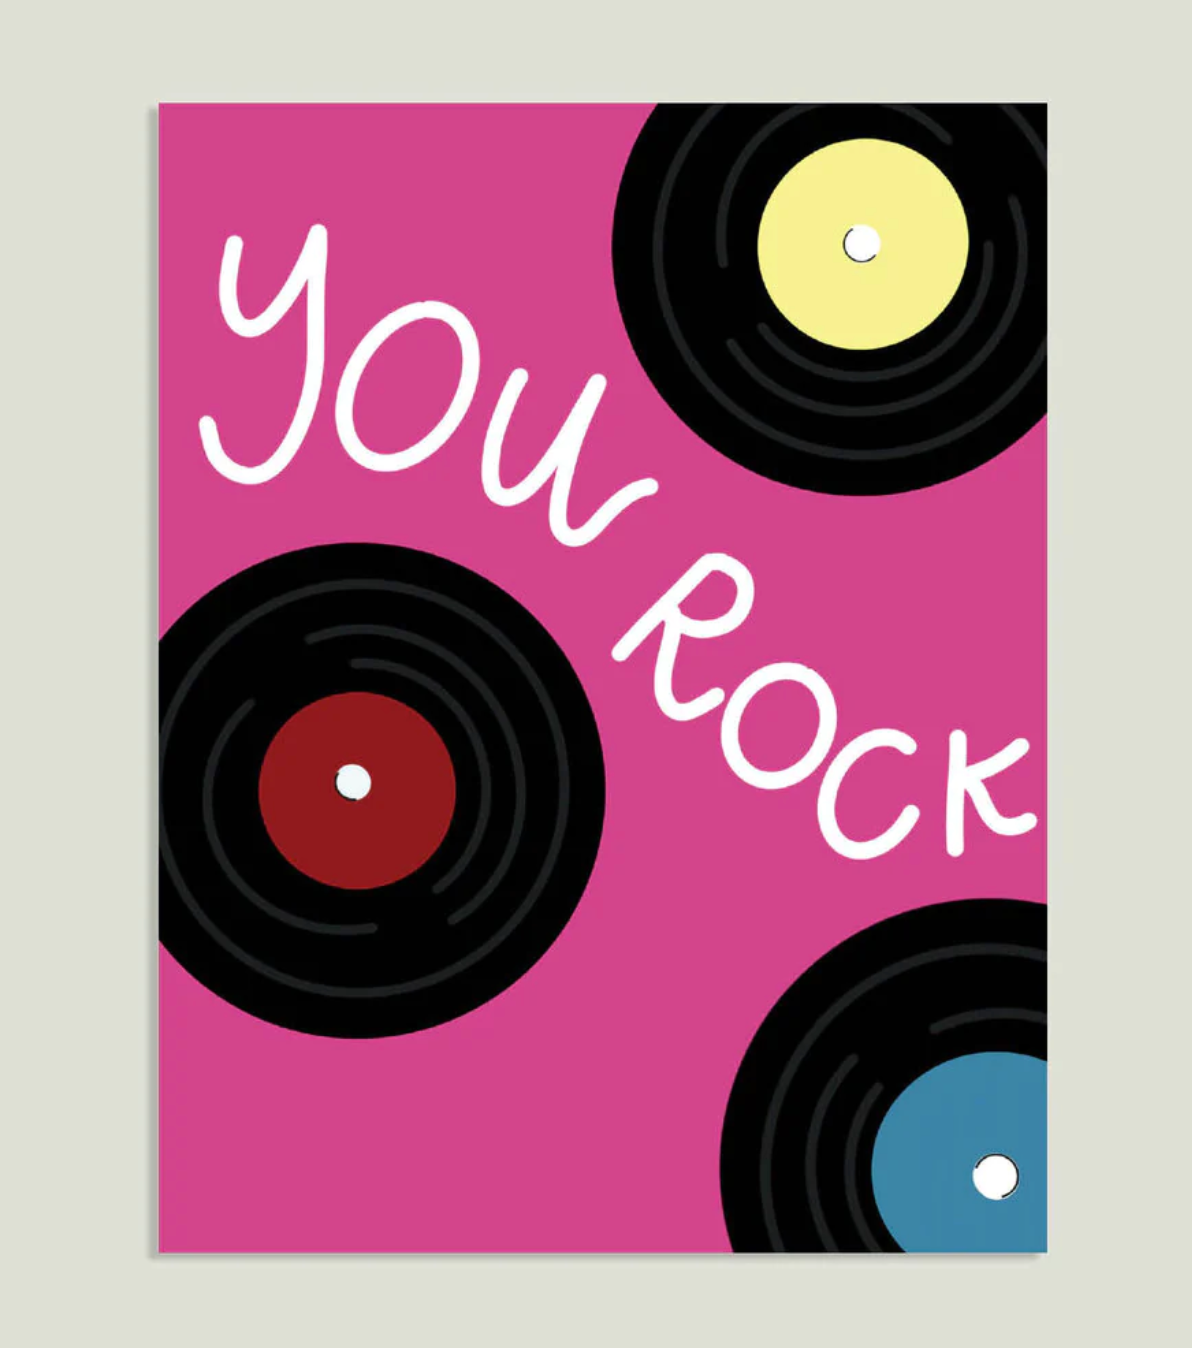 "You rock" Greeting card with records made by Lauren Brawley Creative